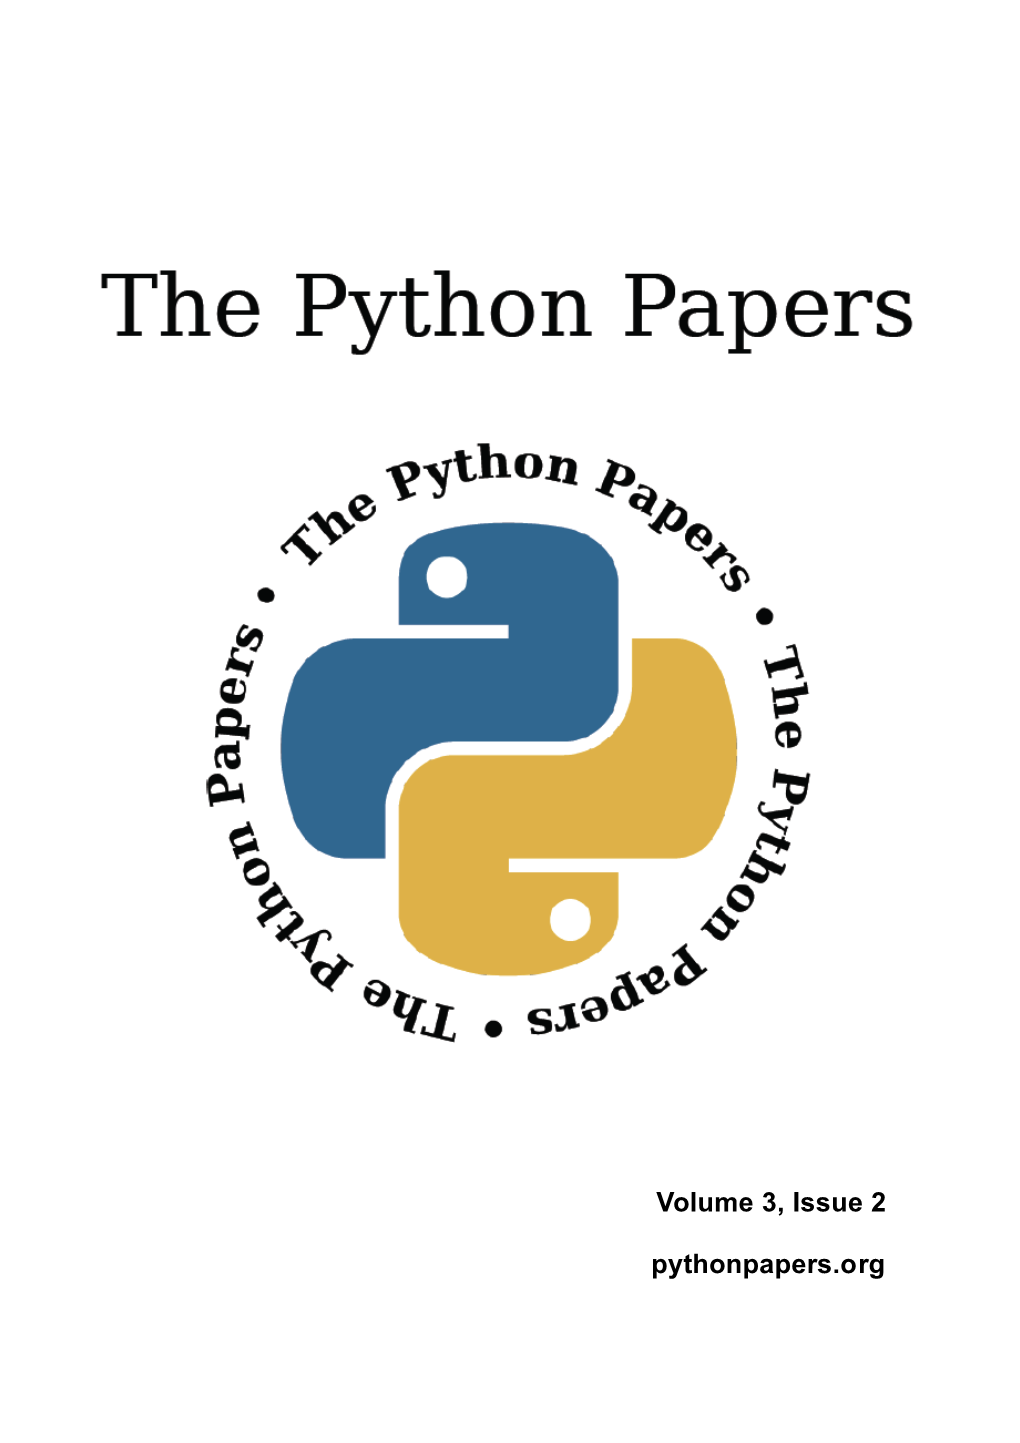 Volume 3, Issue 2 Pythonpapers.Org Journal Information